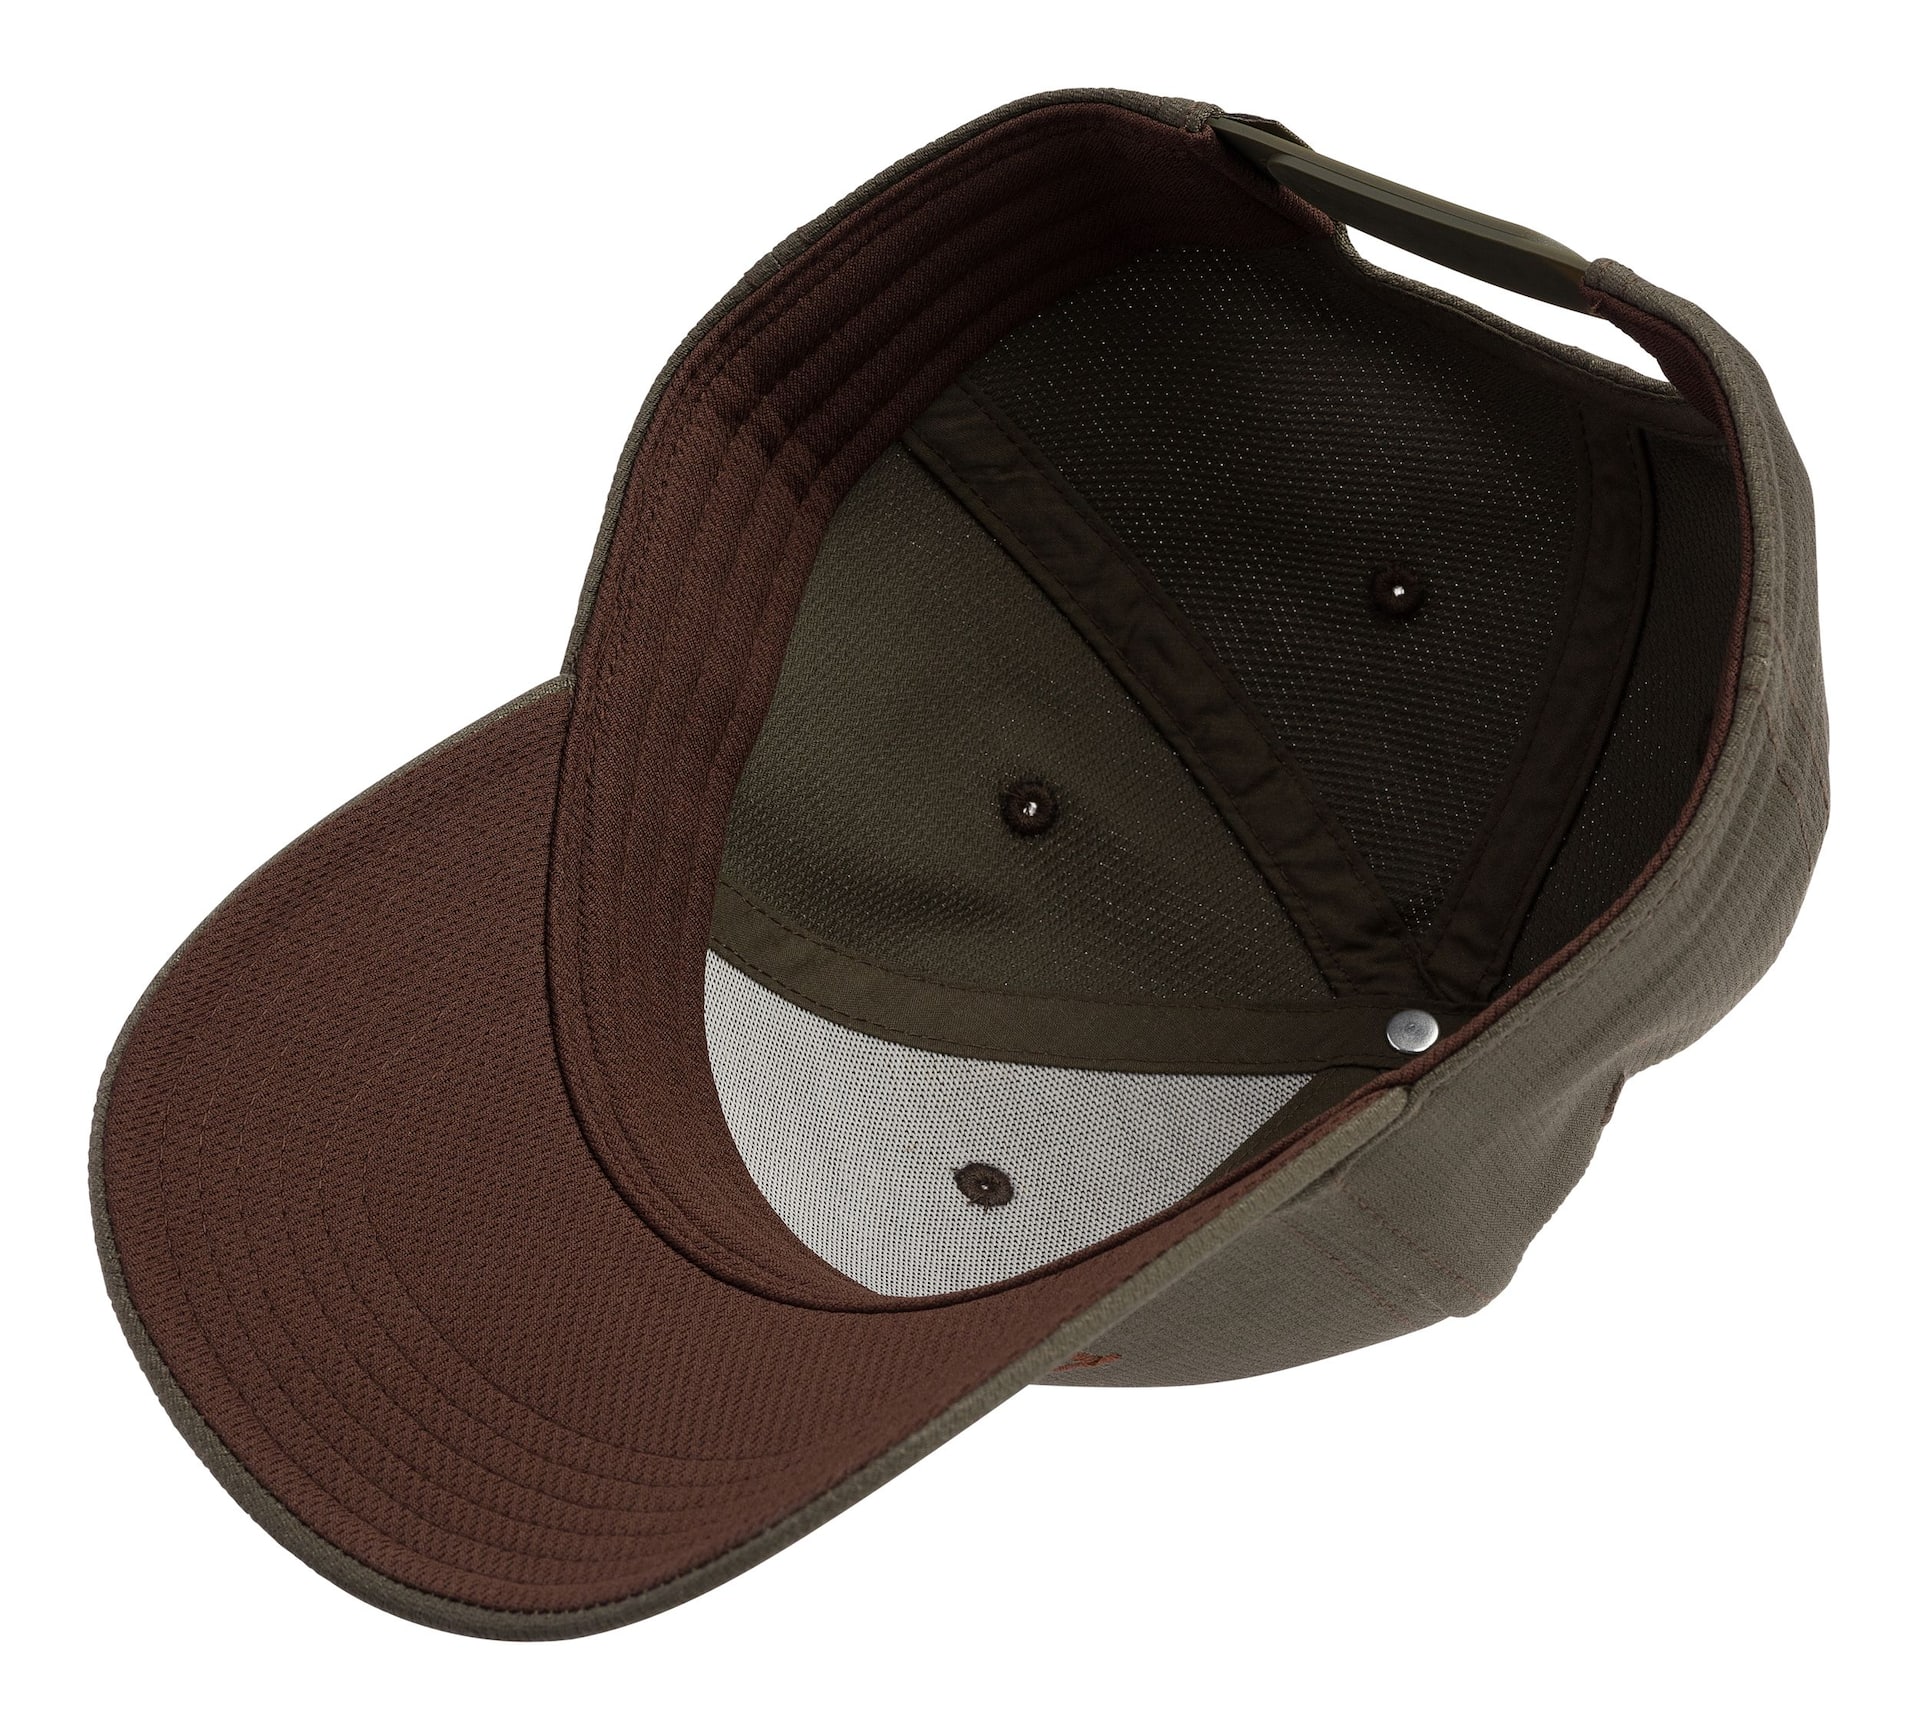 Browning Delux Loden Hunting Baseball CaP with Adjustable Closure